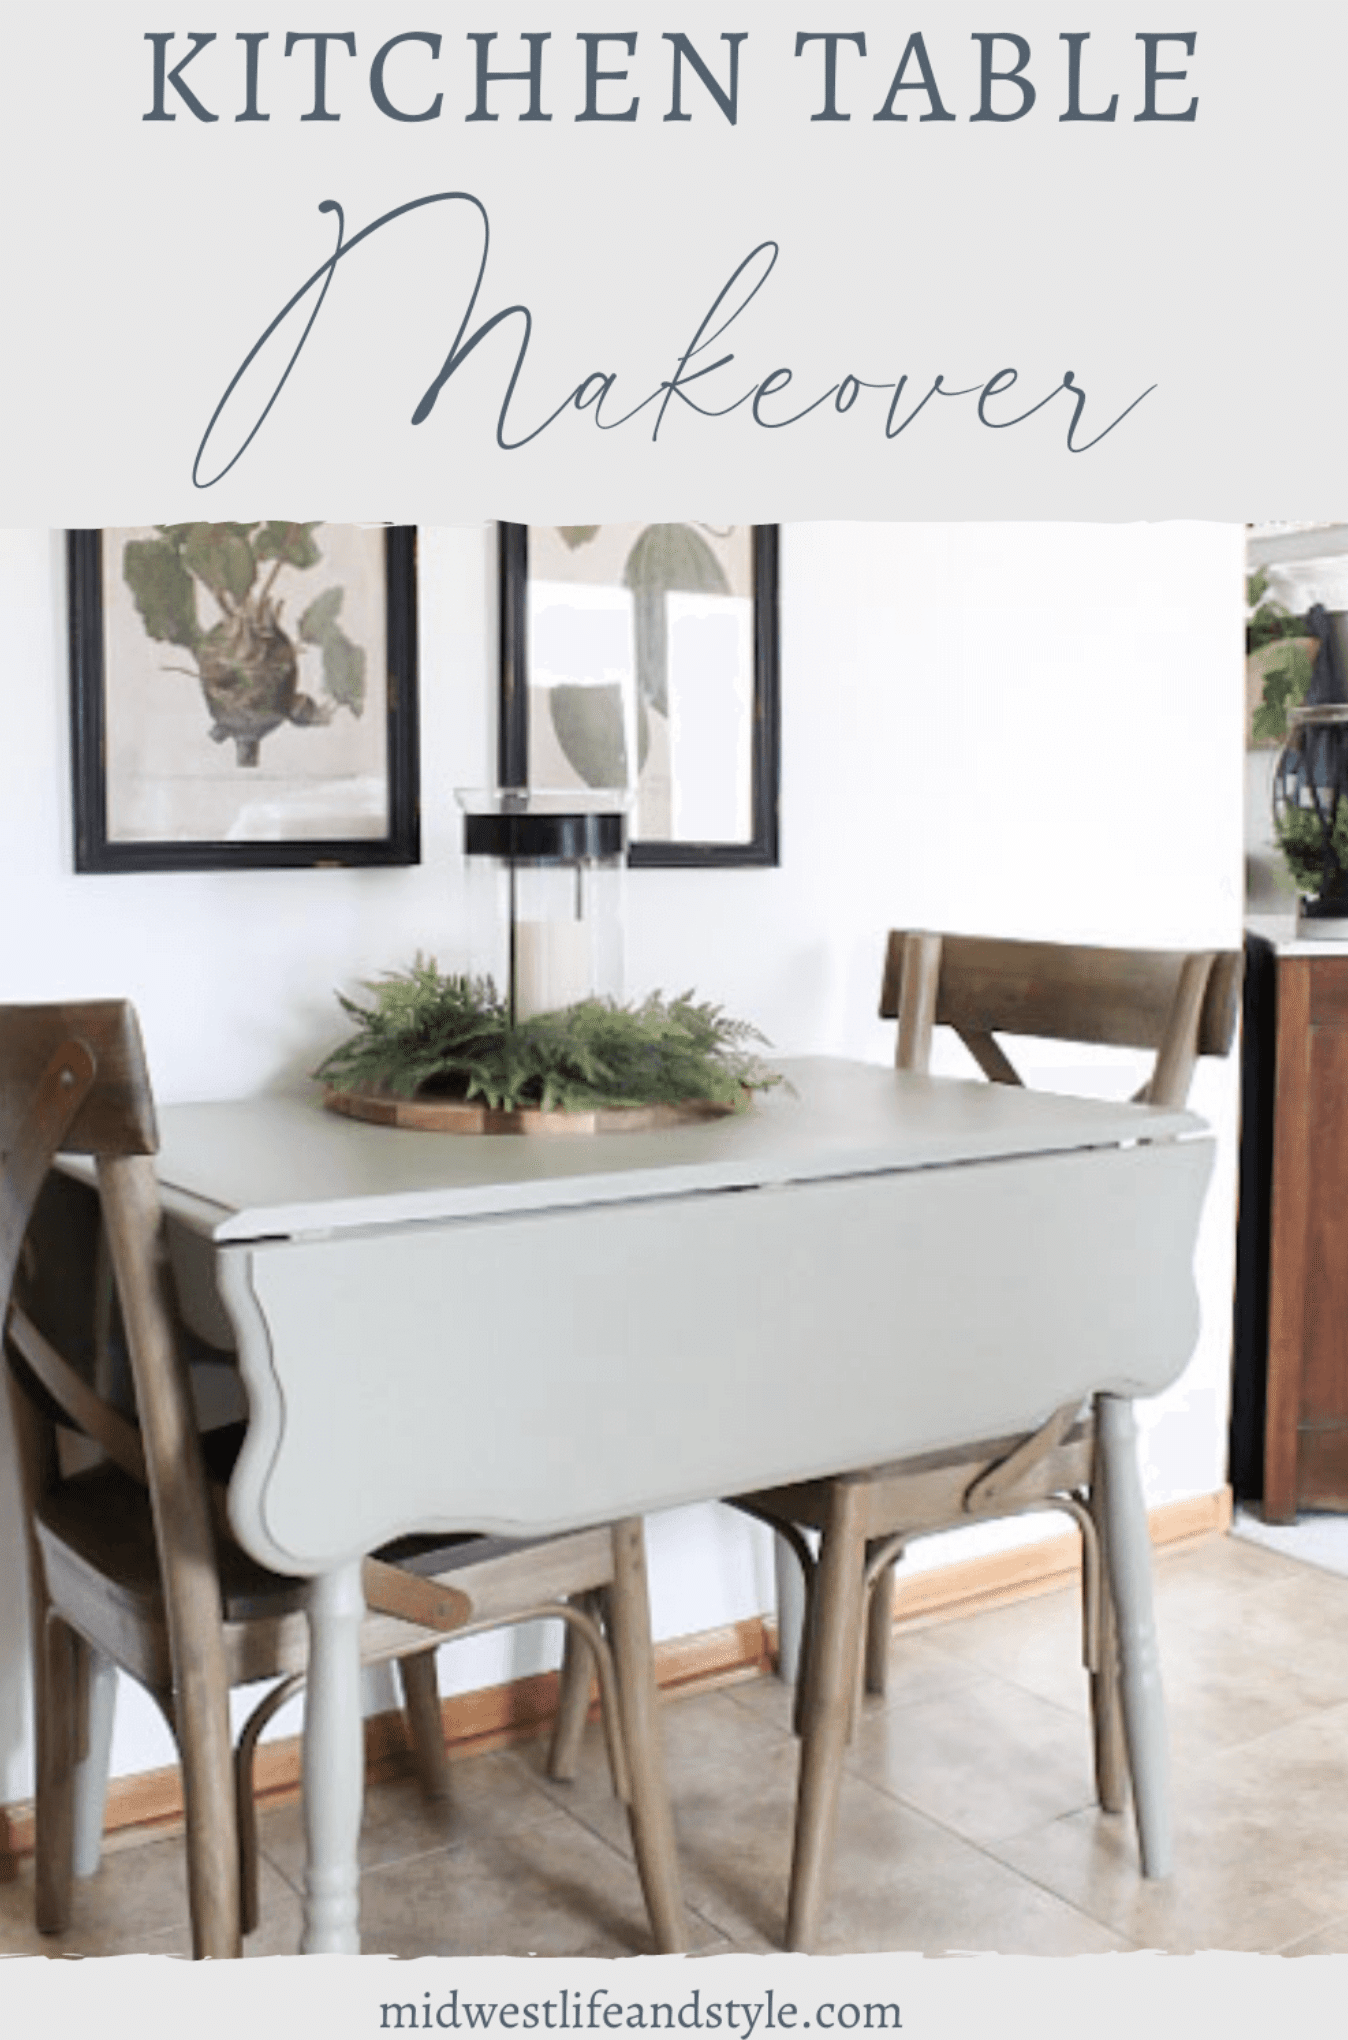 Do you have an outdated table that could use some TLC? Jen shows you how easy it is to give your kitchen table an affordable makeover with just a bit of mistint paint.